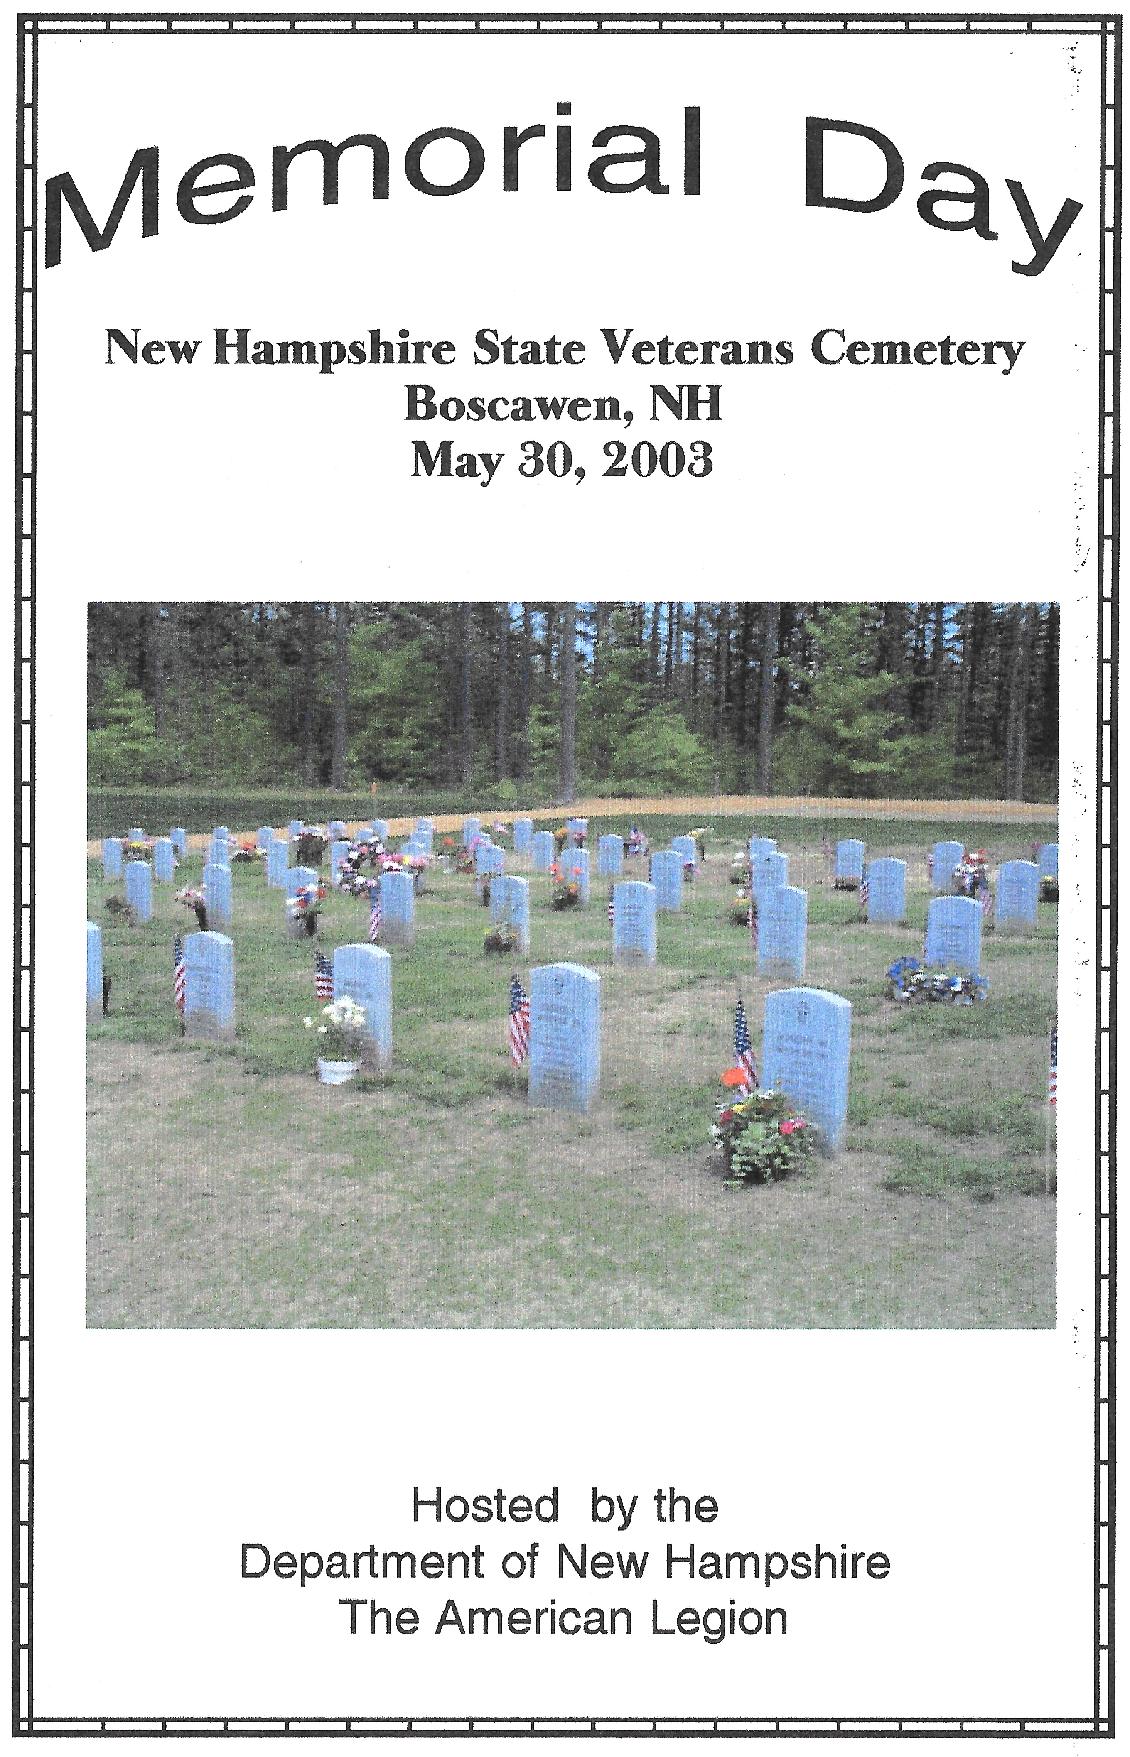 Memorial Day Program at the NH State Veterans Cemetery May 30th 2003